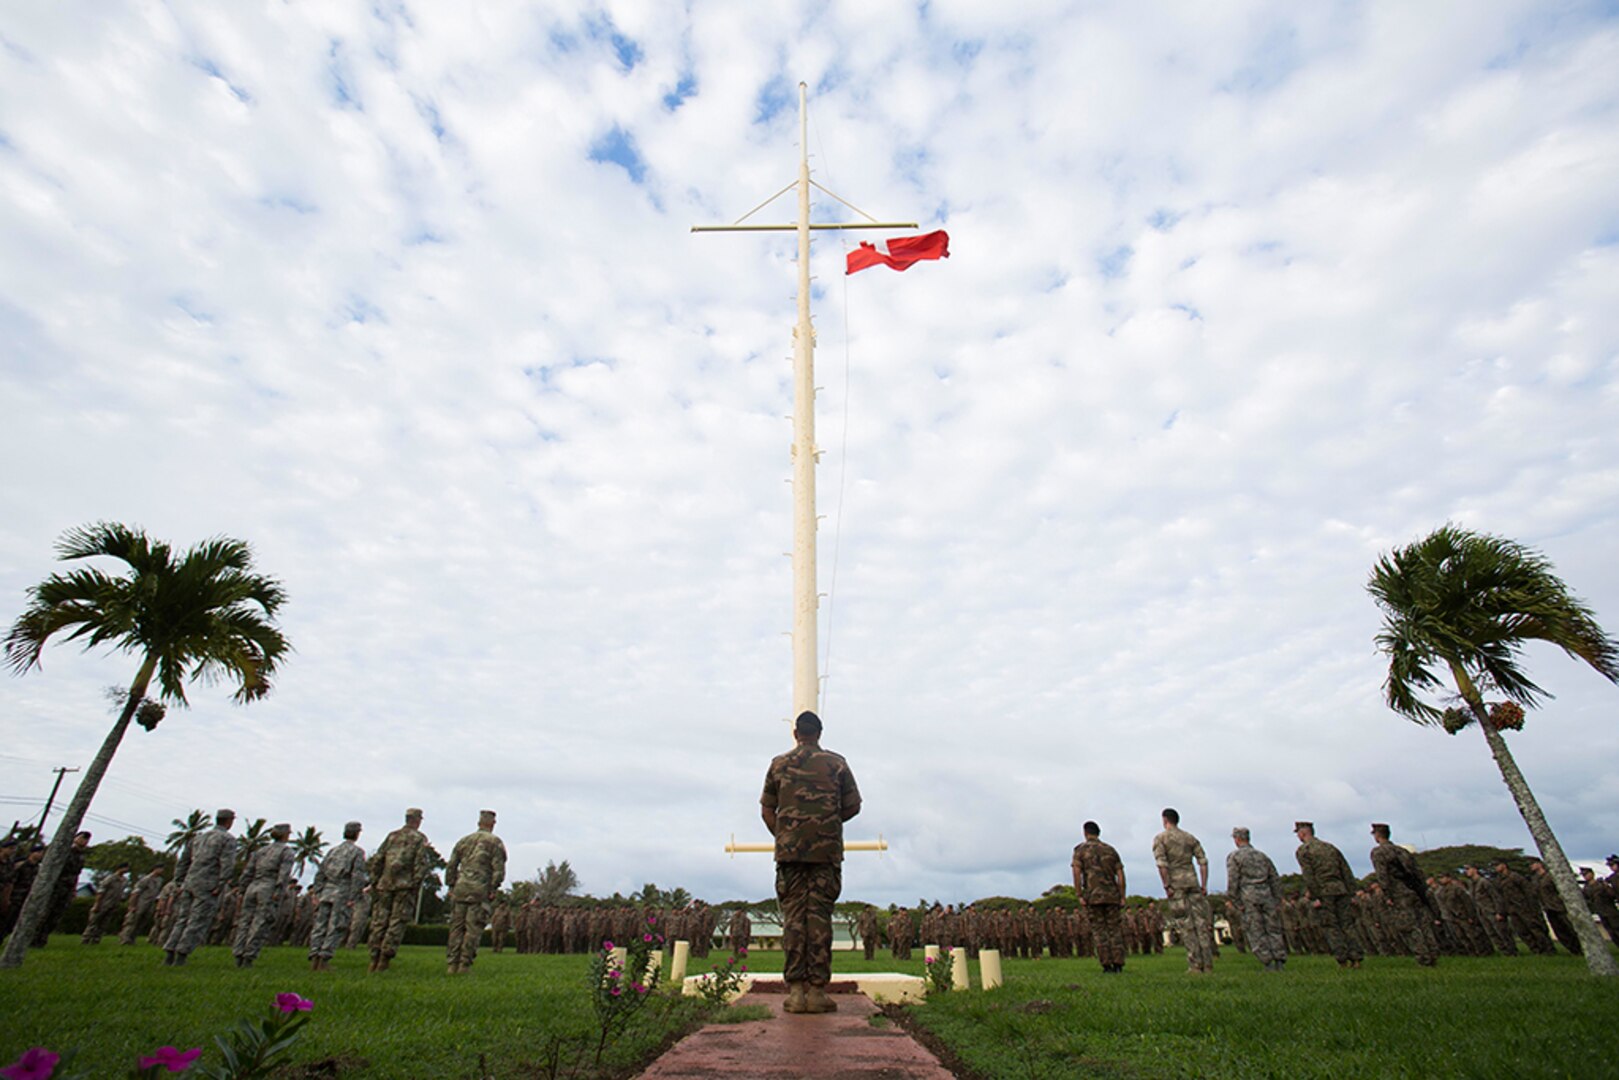 U.S. Marines and sailors with Task Force Koa Moana 17, Tonga’s His Majesty’s Armed Forces, French soldiers and members of the New Zealand Defense Force stand at attention as a Tongan flag is raised during the opening ceremony of Exercise TAFAKULA July 17 on Tongatapu Island, Tonga. The ceremony marks the start of two weeks of infantry and law enforcement training between the militaries. 